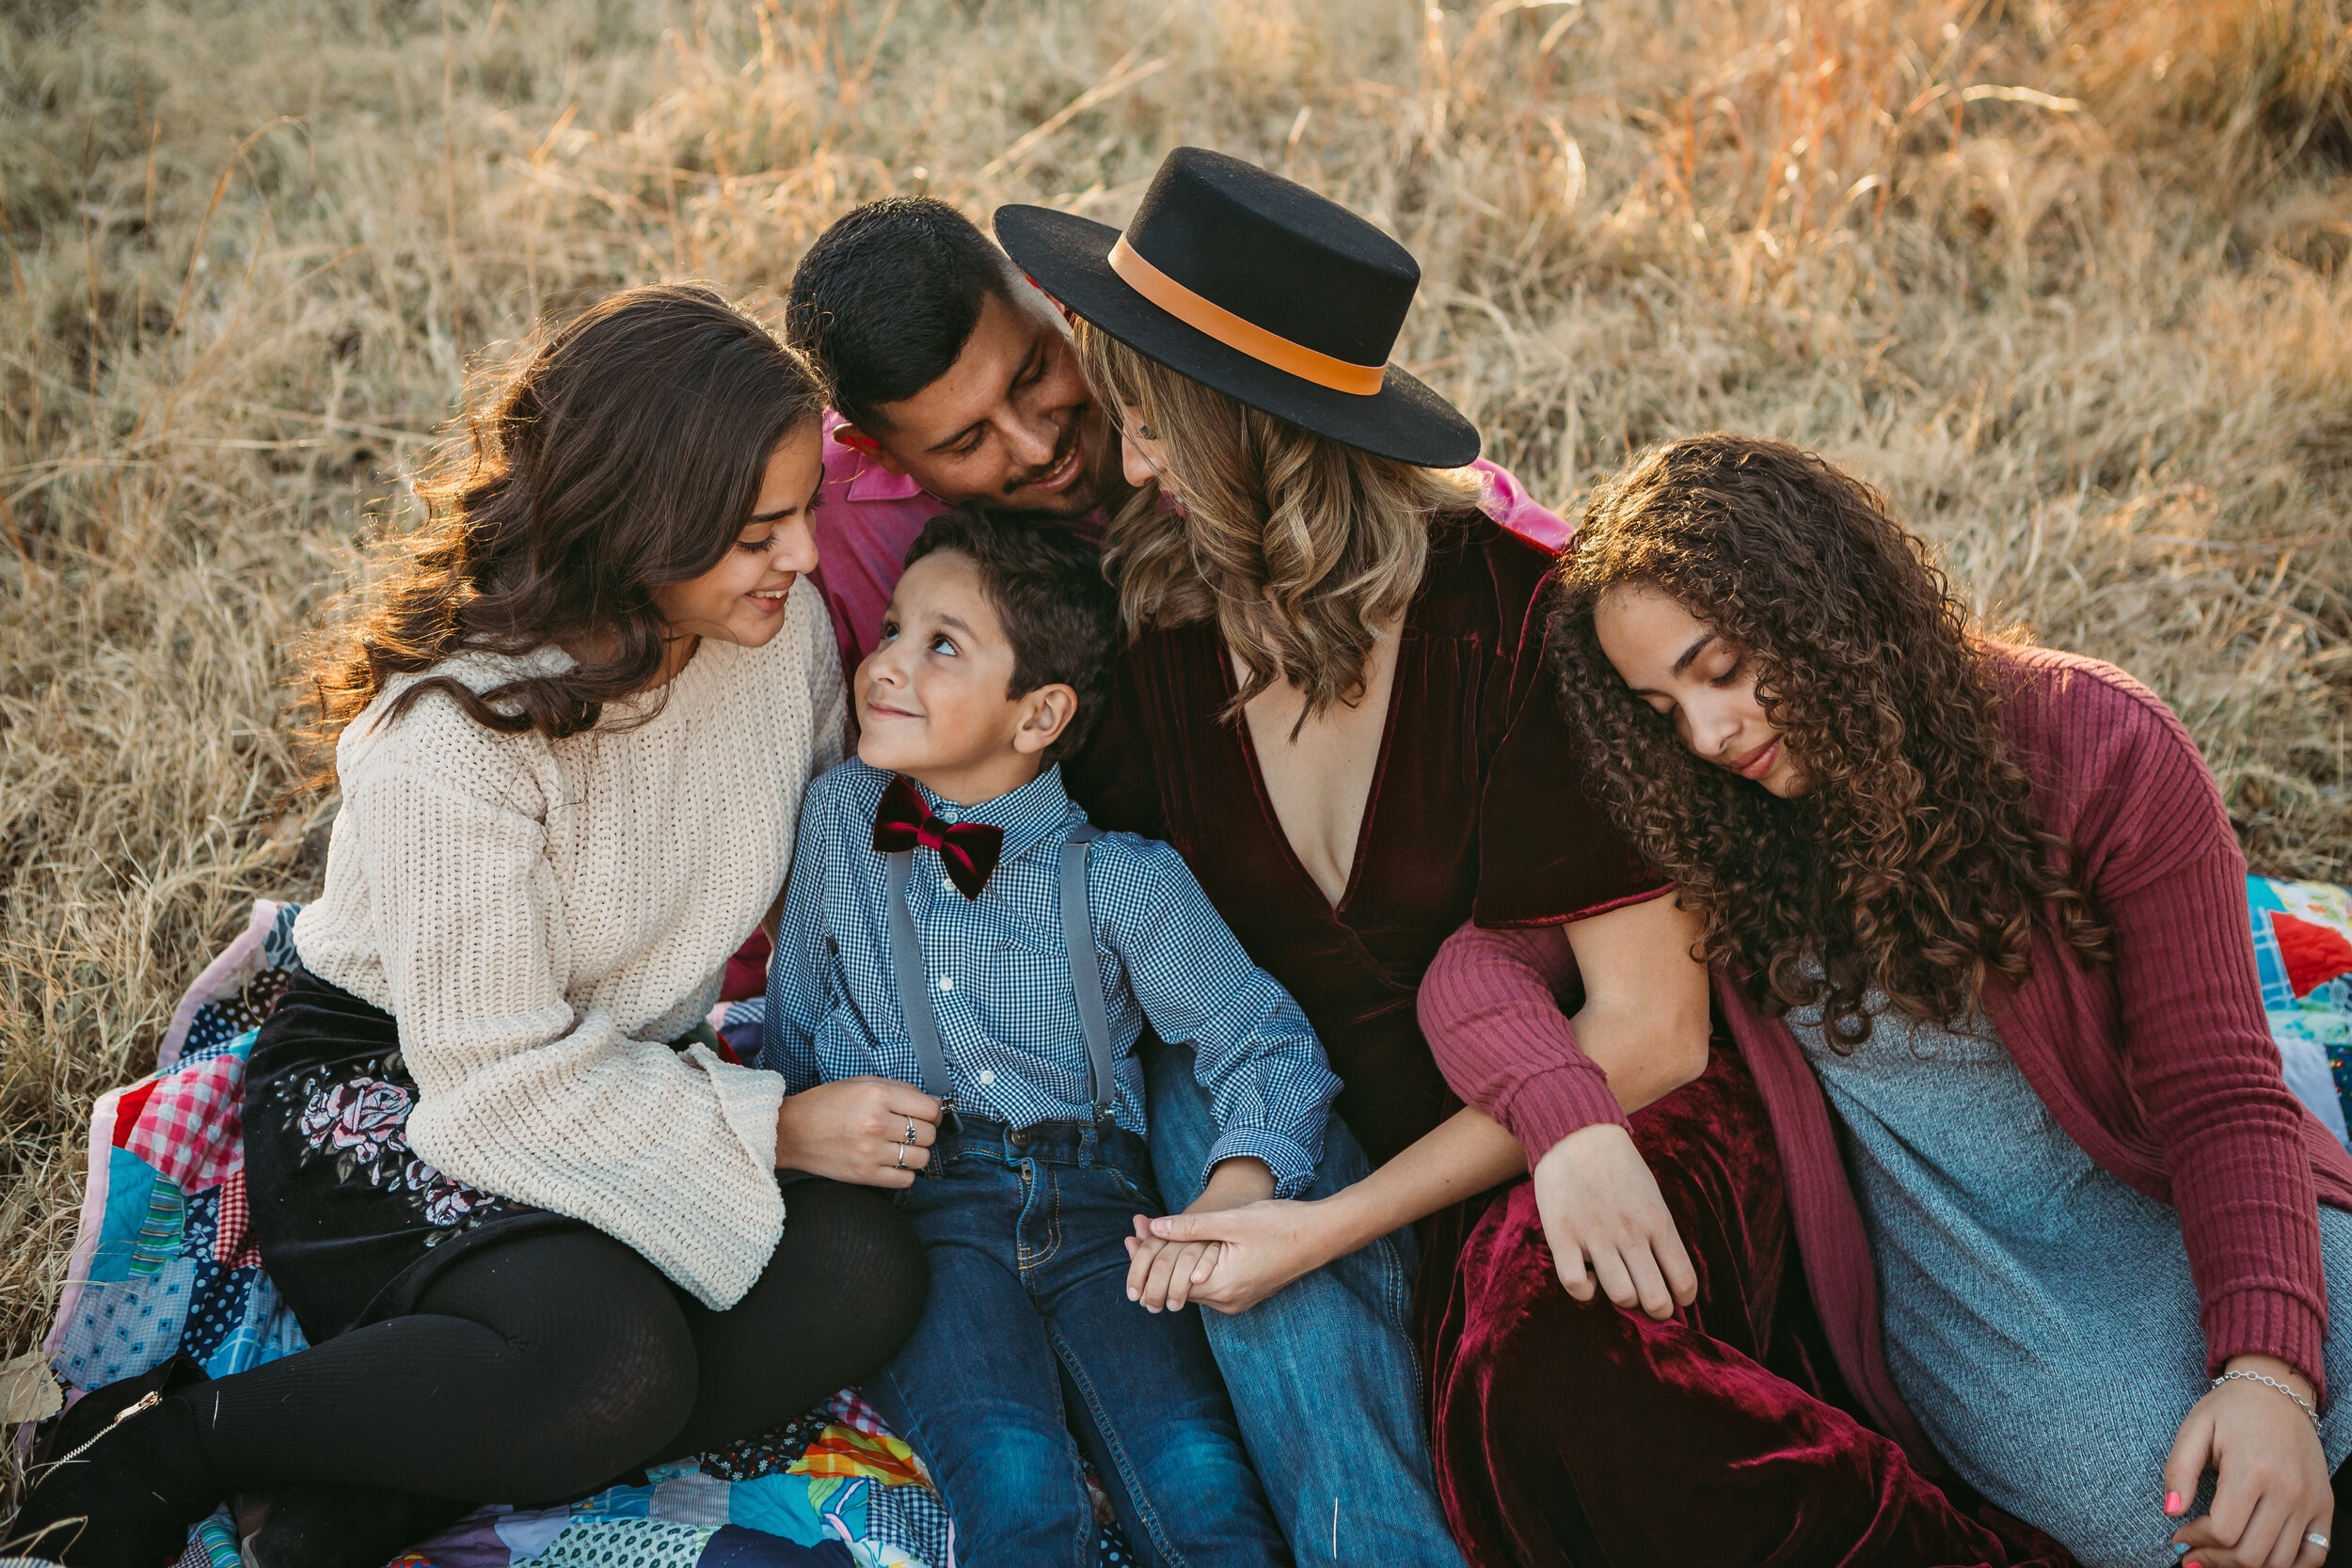  Natural family interaction as they enjoy time all together #tealawardphotography #texasfamilyphotographer #amarillophotographer #amarillofamilyphotographer #lifestylephotography #fallphotos #familyphotoshoot #family #lovingsiblings #families #familyphotos #naturalfamilyinteraction 